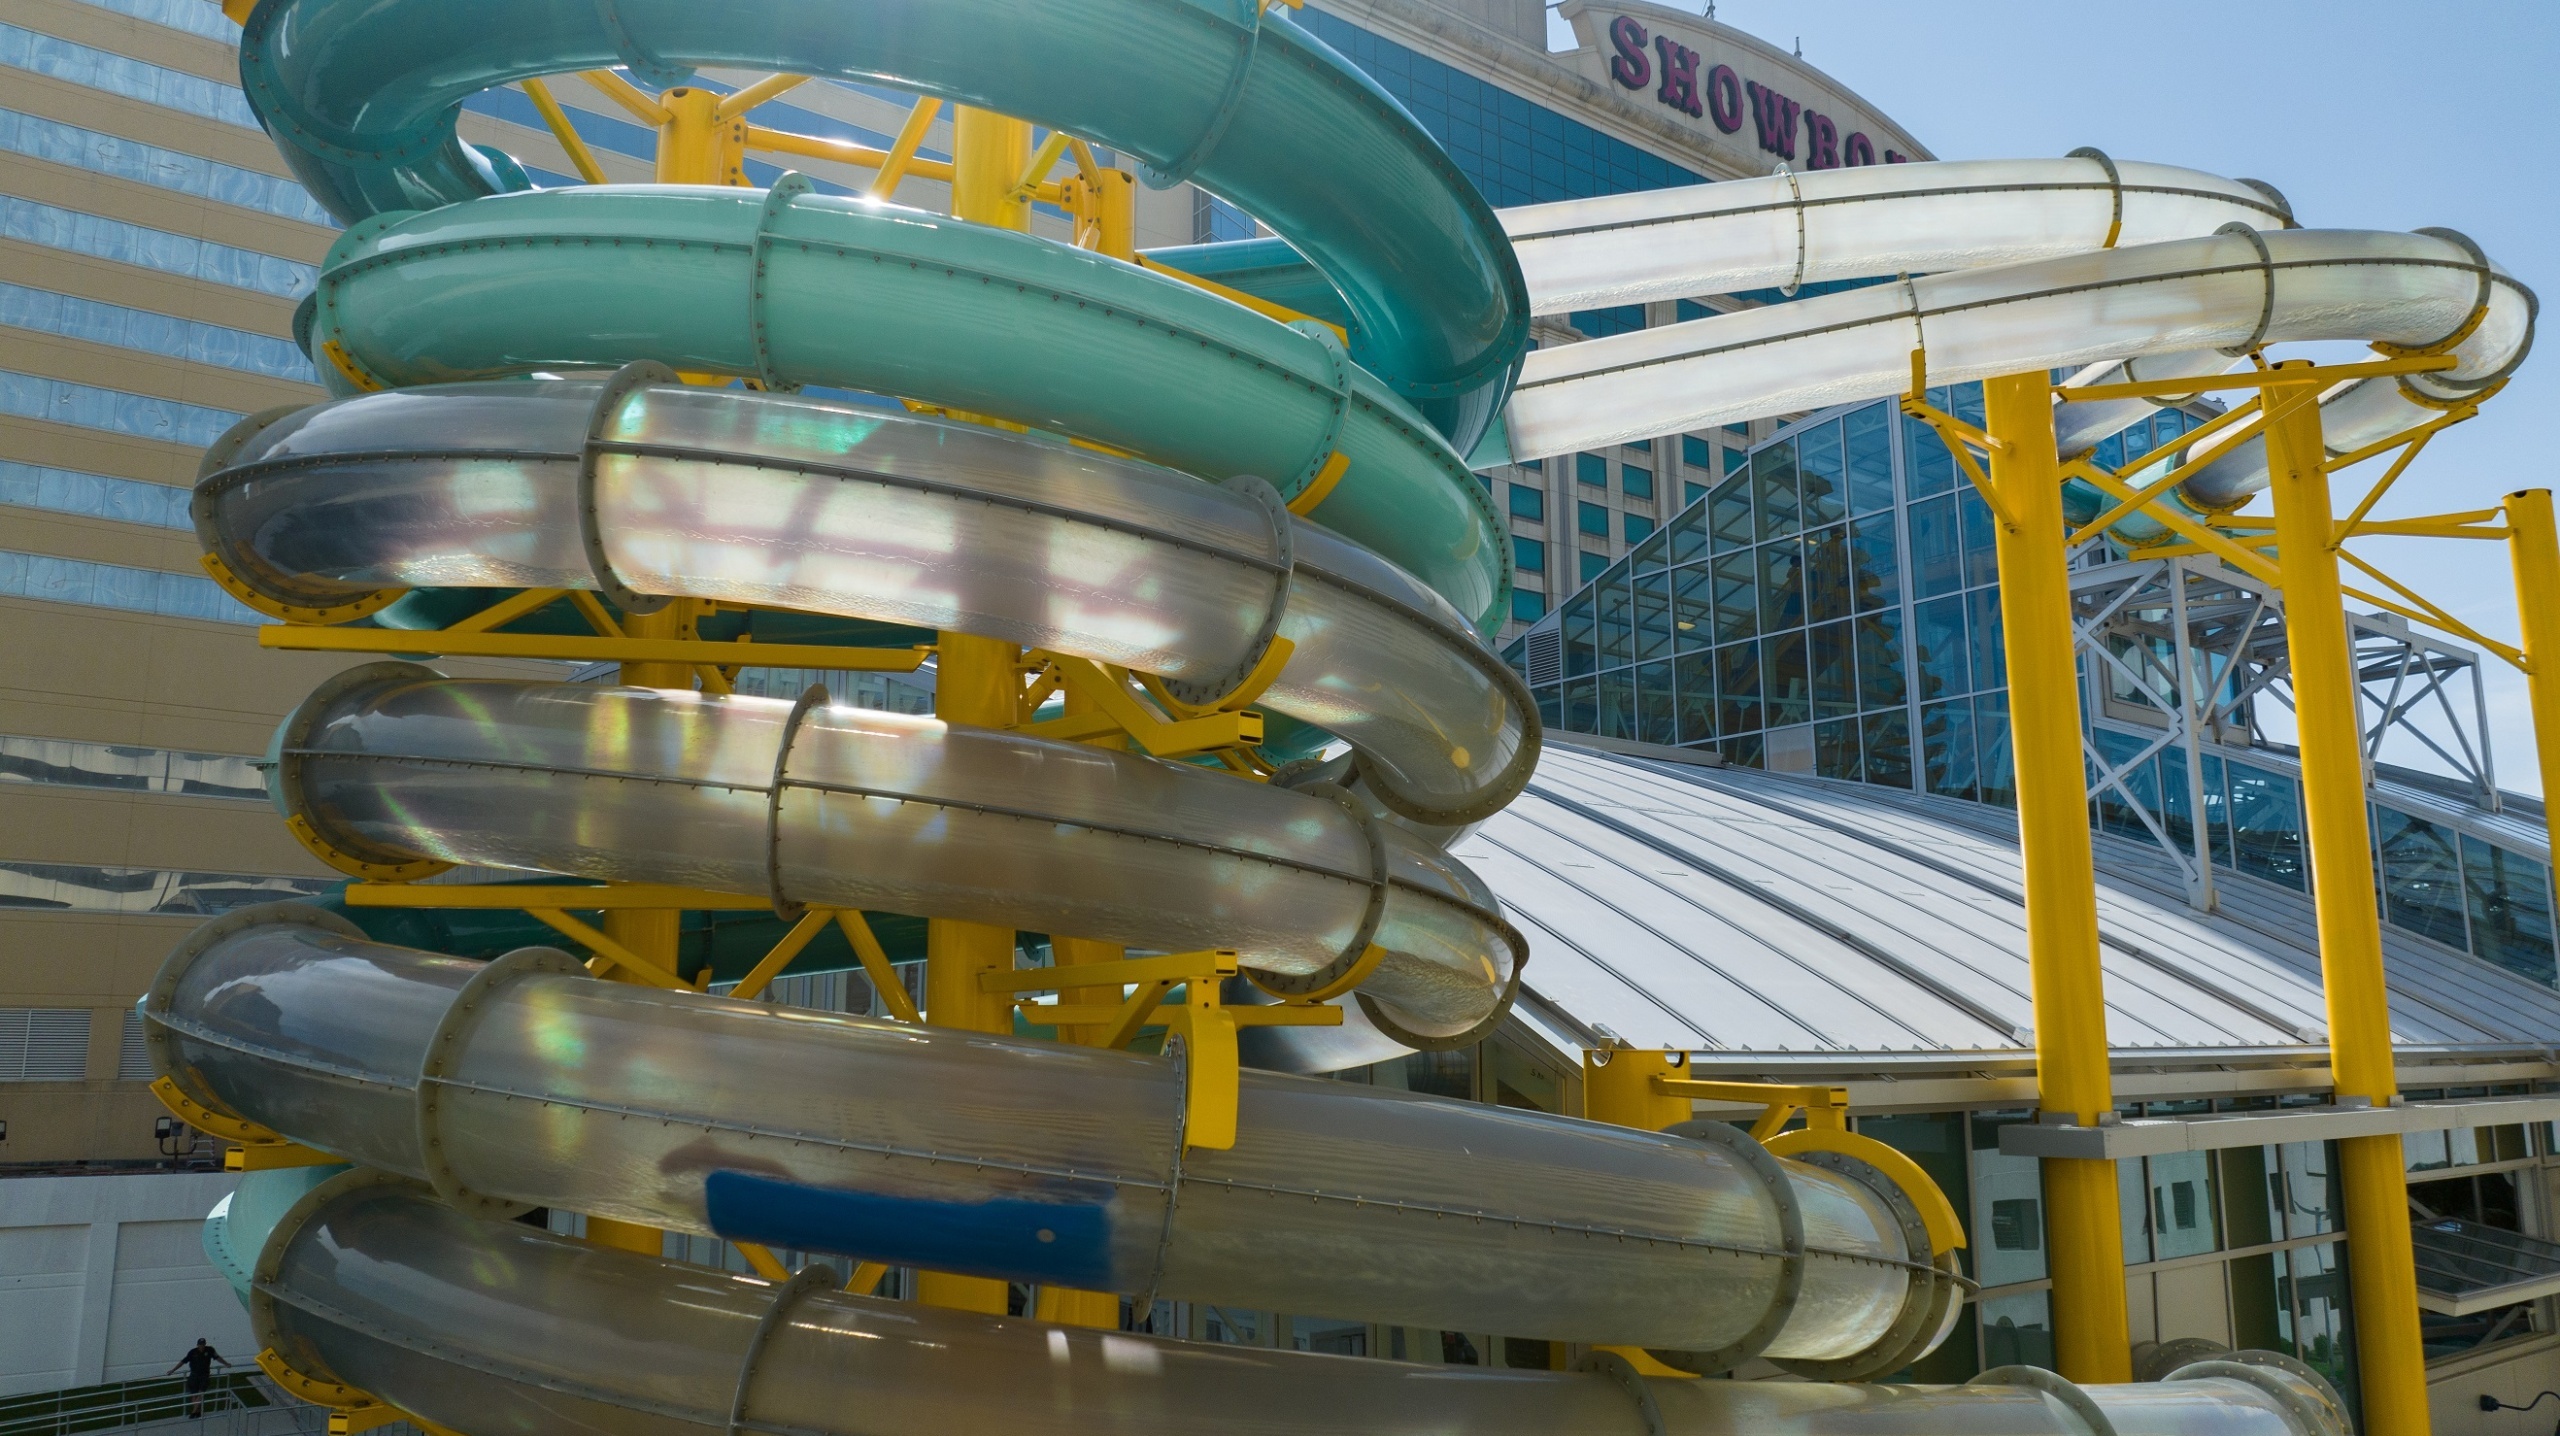 Water slides protruding outside a building